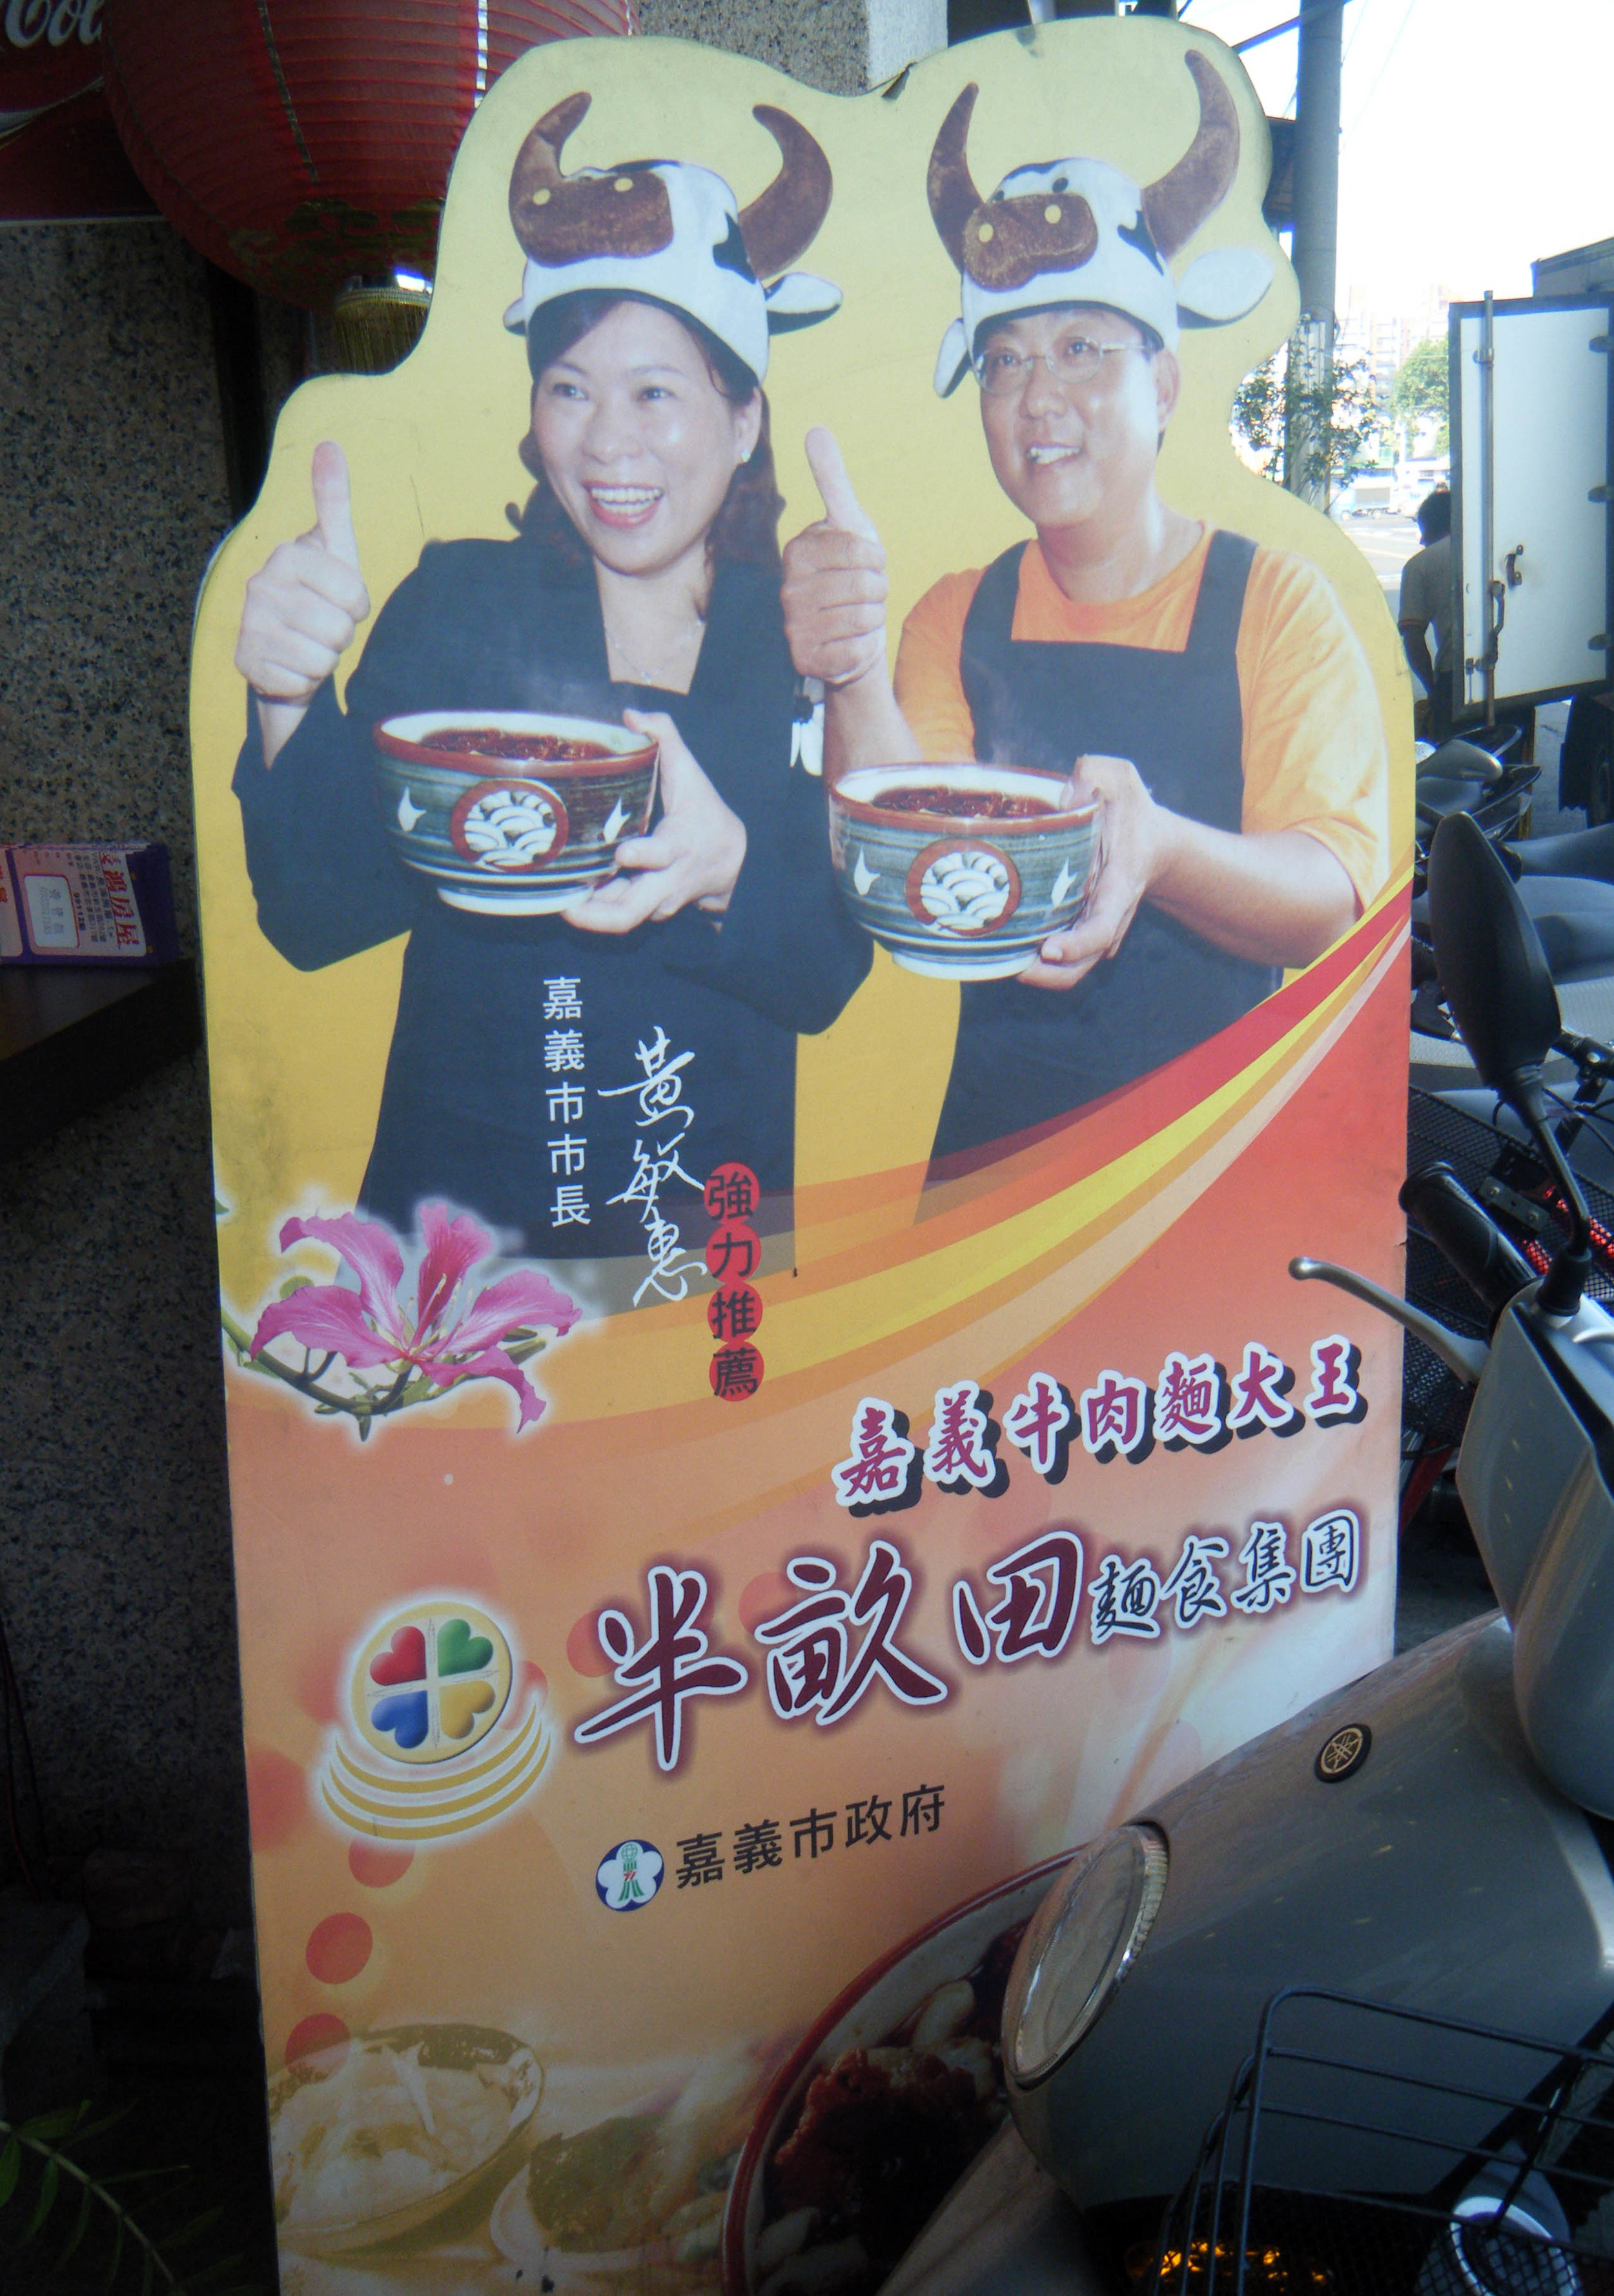 northern Chinese cuisine place.jpg